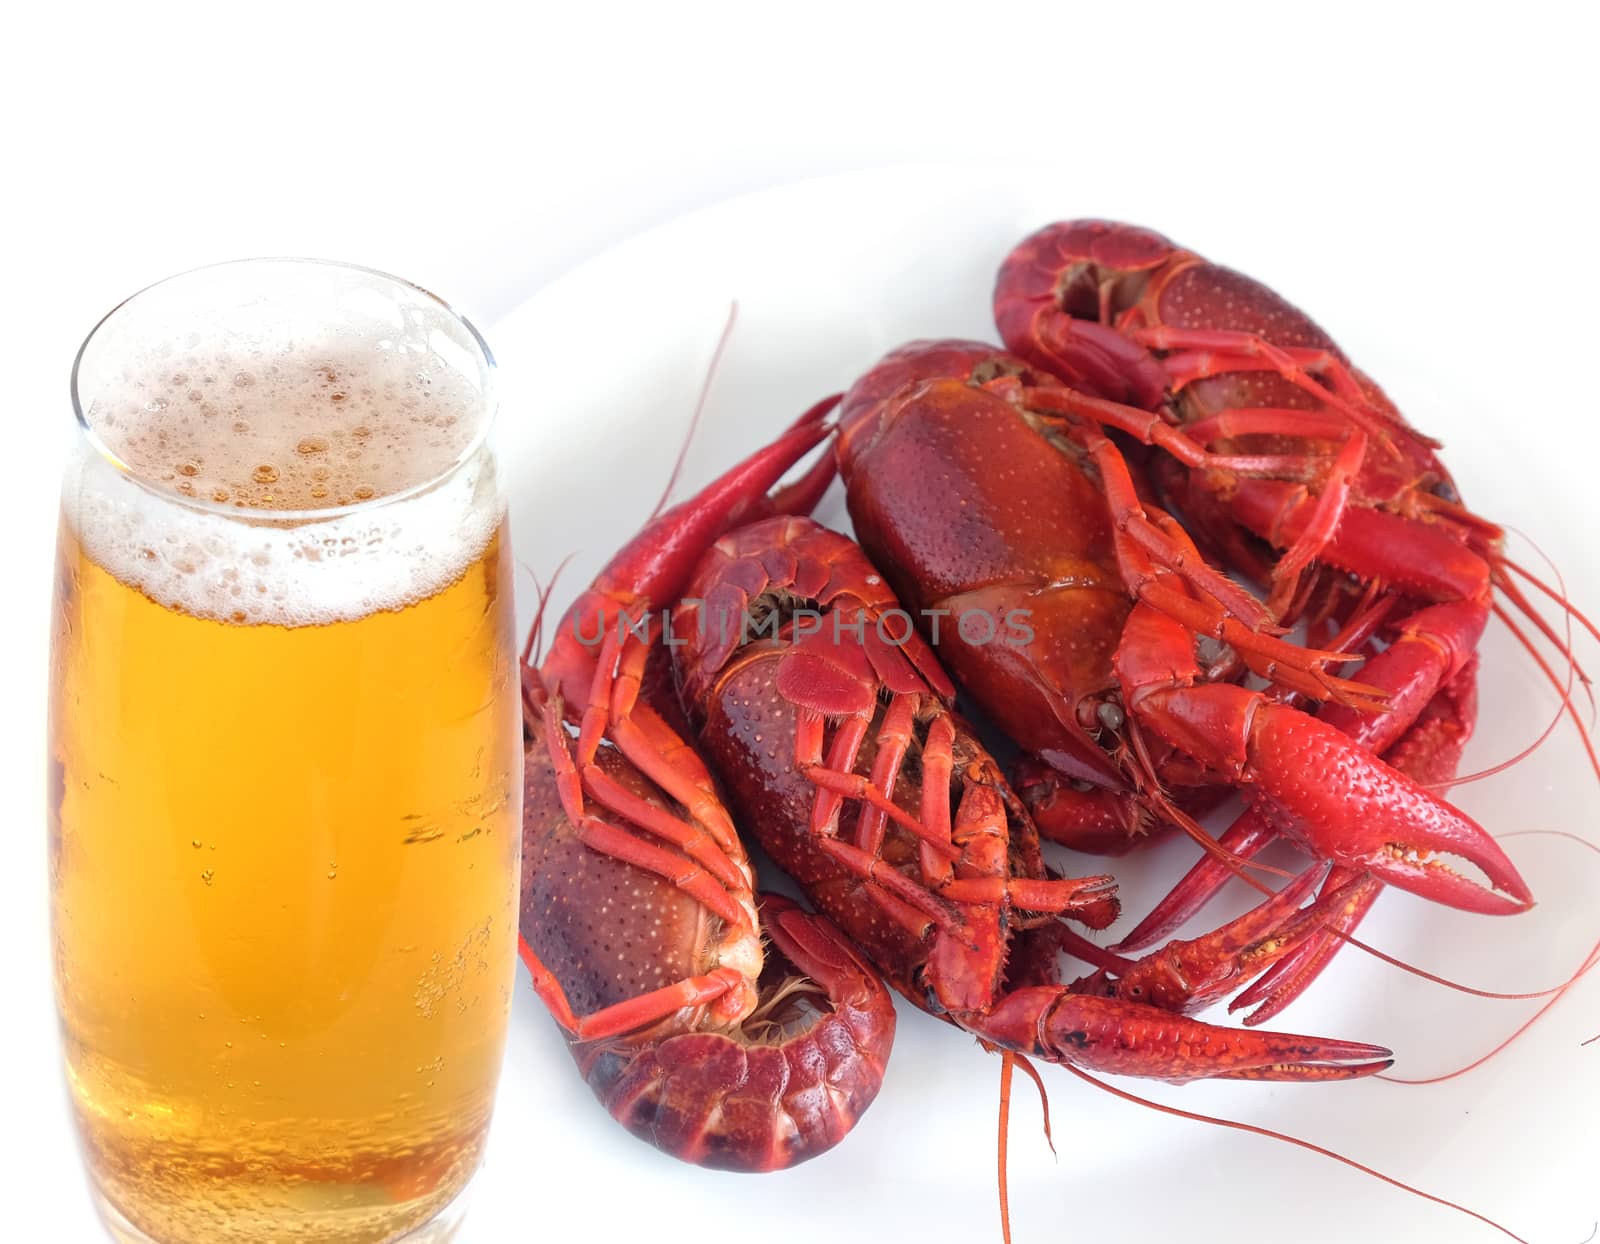 Four boiled crayfish color red and high glass of amber beer studio shot isolated on white background top view close-up